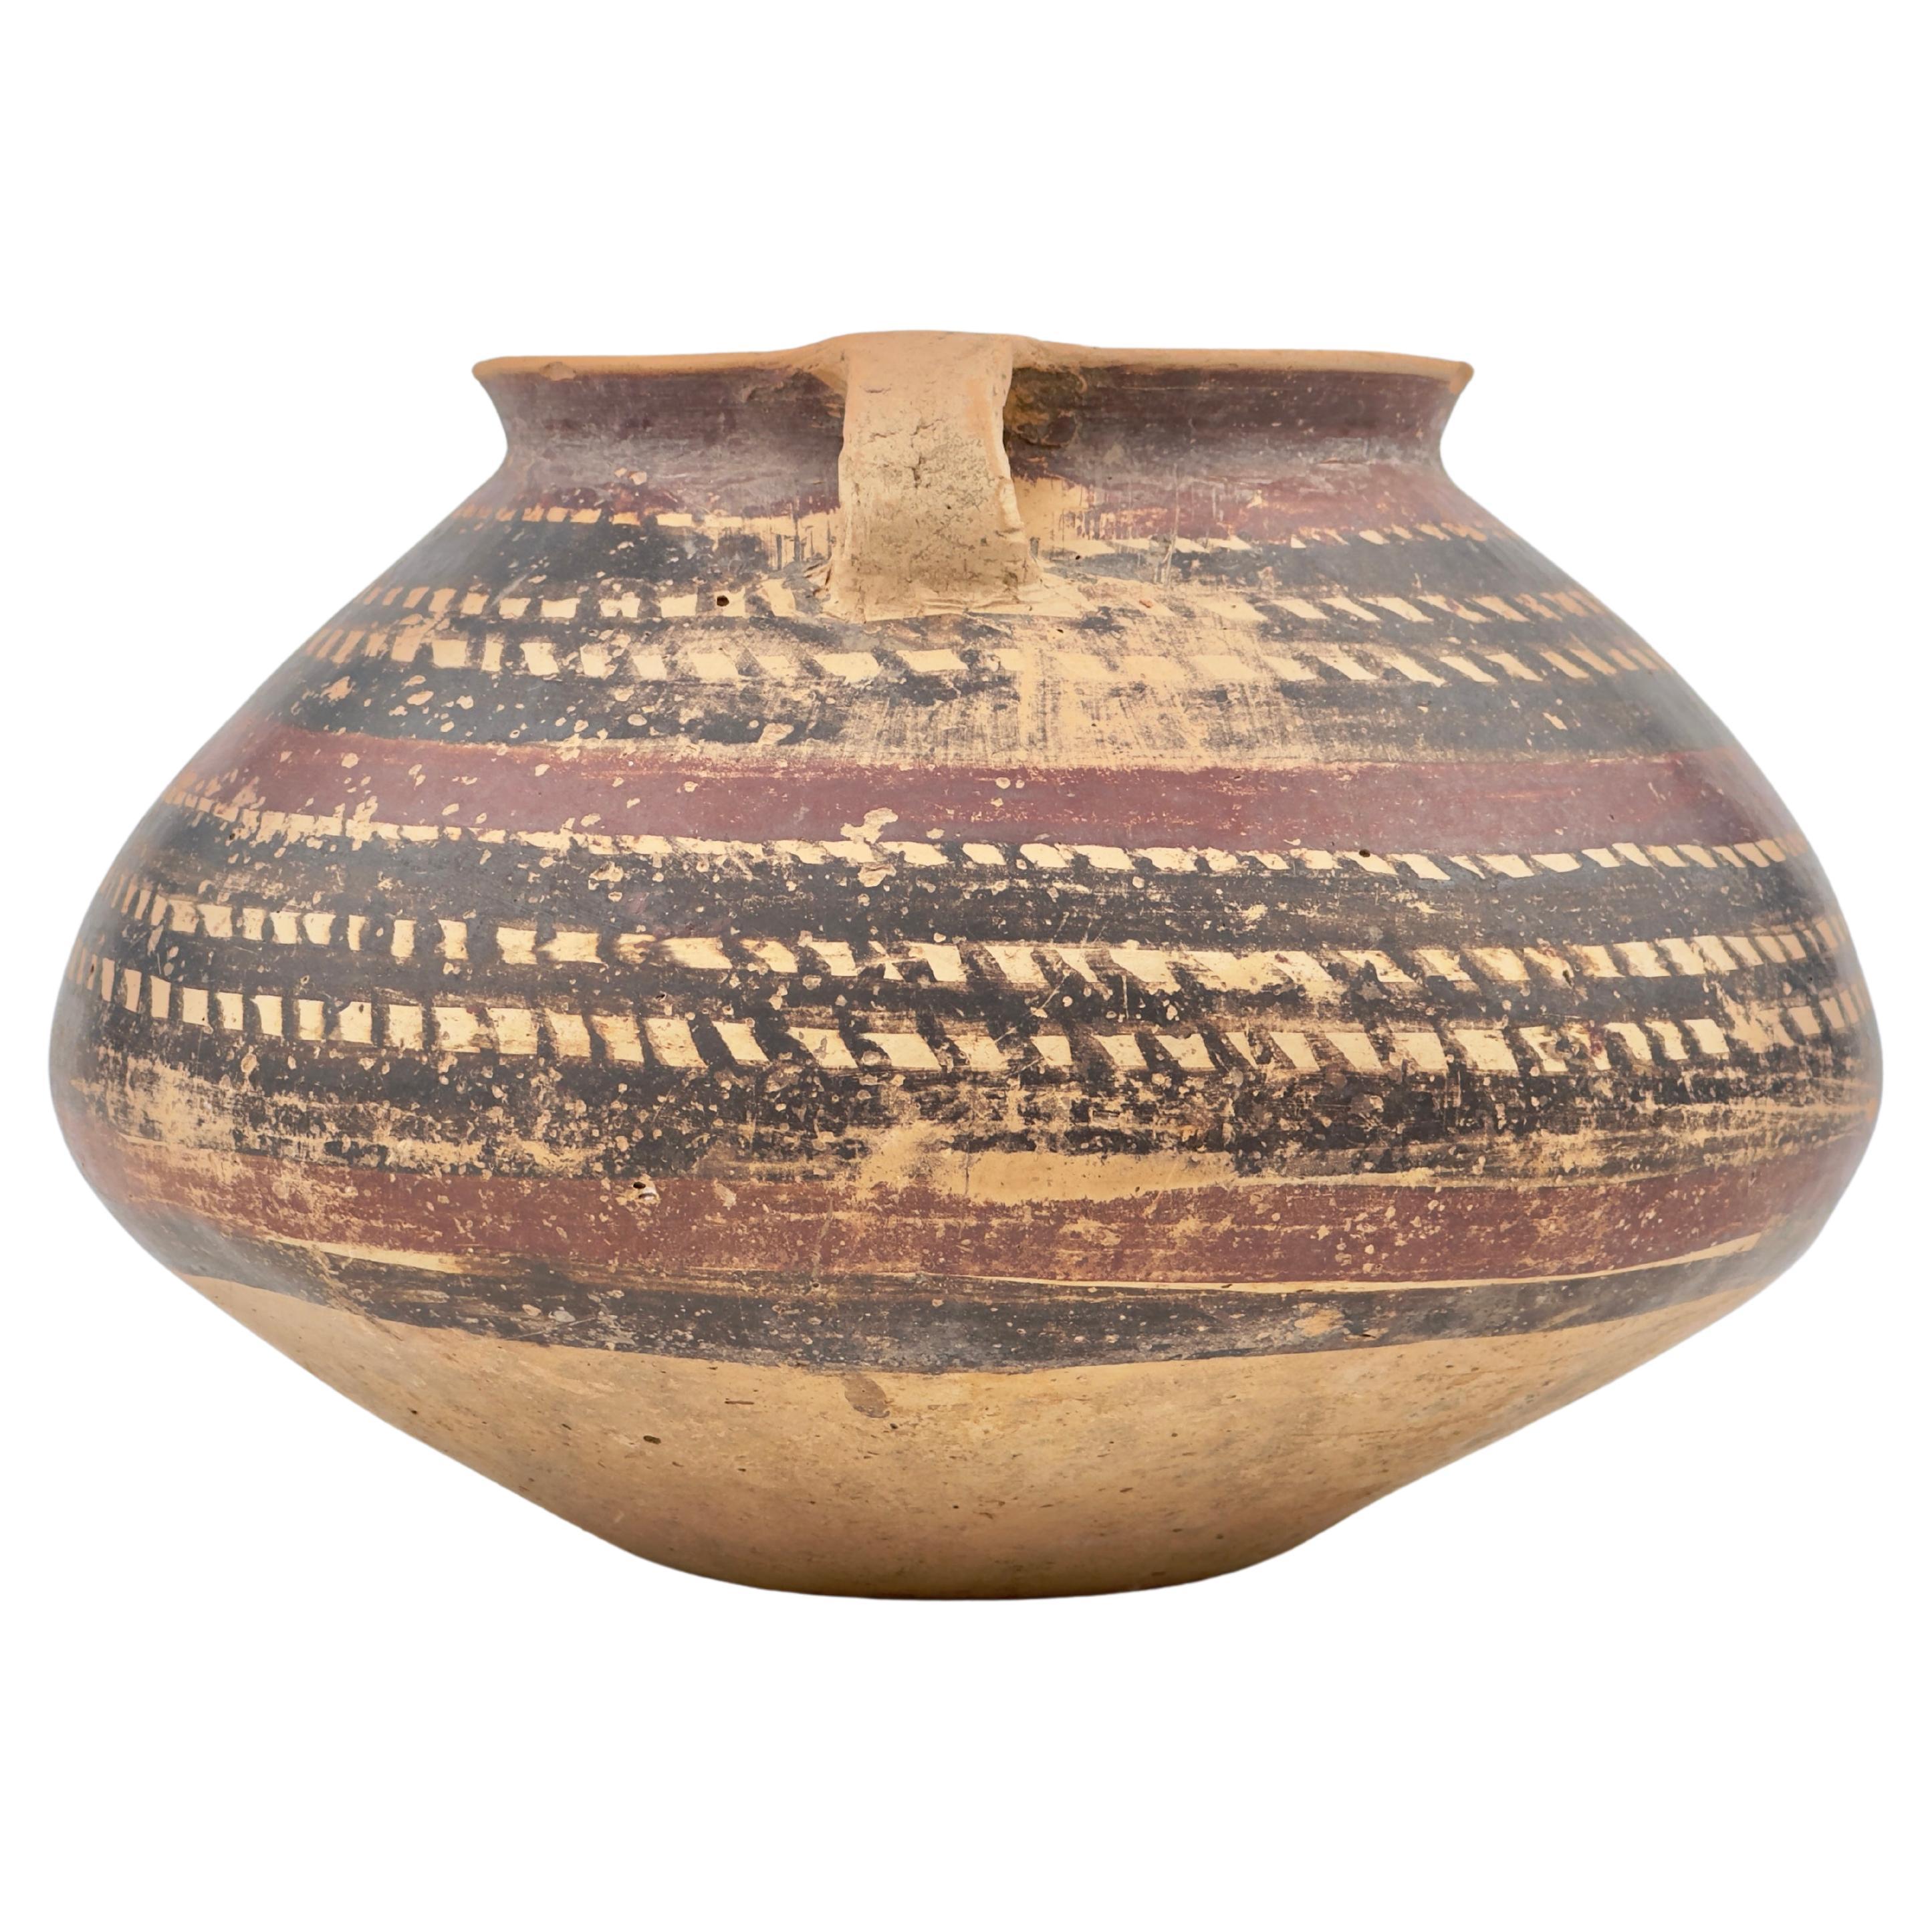 Neolithic Yangshao Culture Pottery Amphora, 3rd-2nd Millenium BC